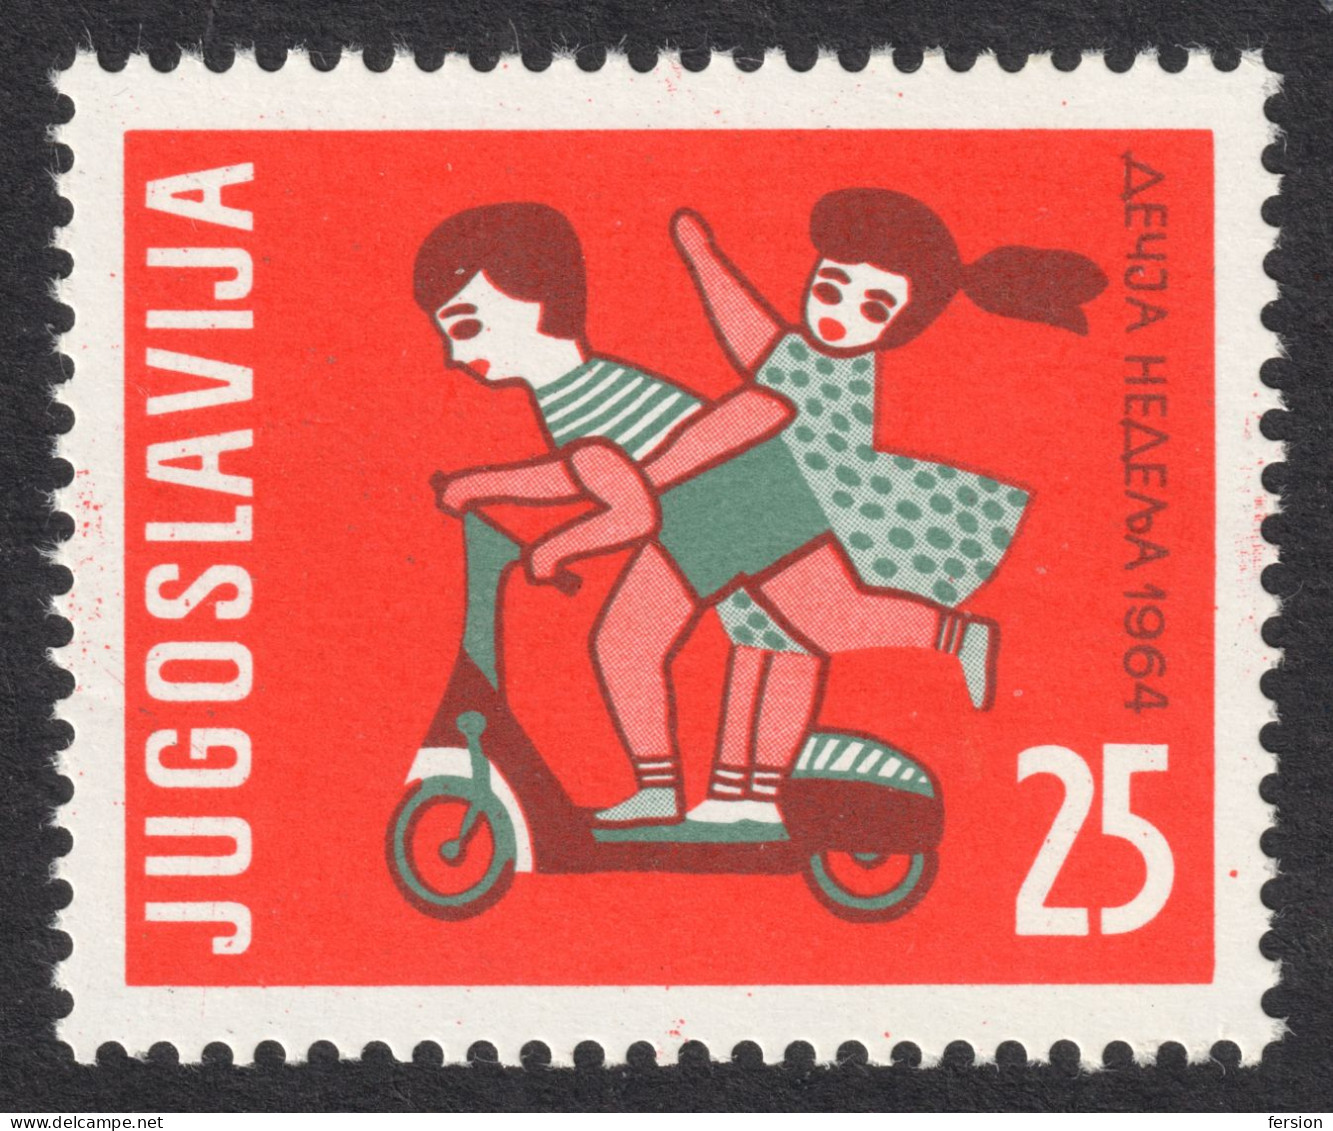 Scooter Motorbike Cycle Moped - USED - 1964 - Yugoslavia - Children Week ADDITIONAL Charity Stamp / Girl Boy - Moto